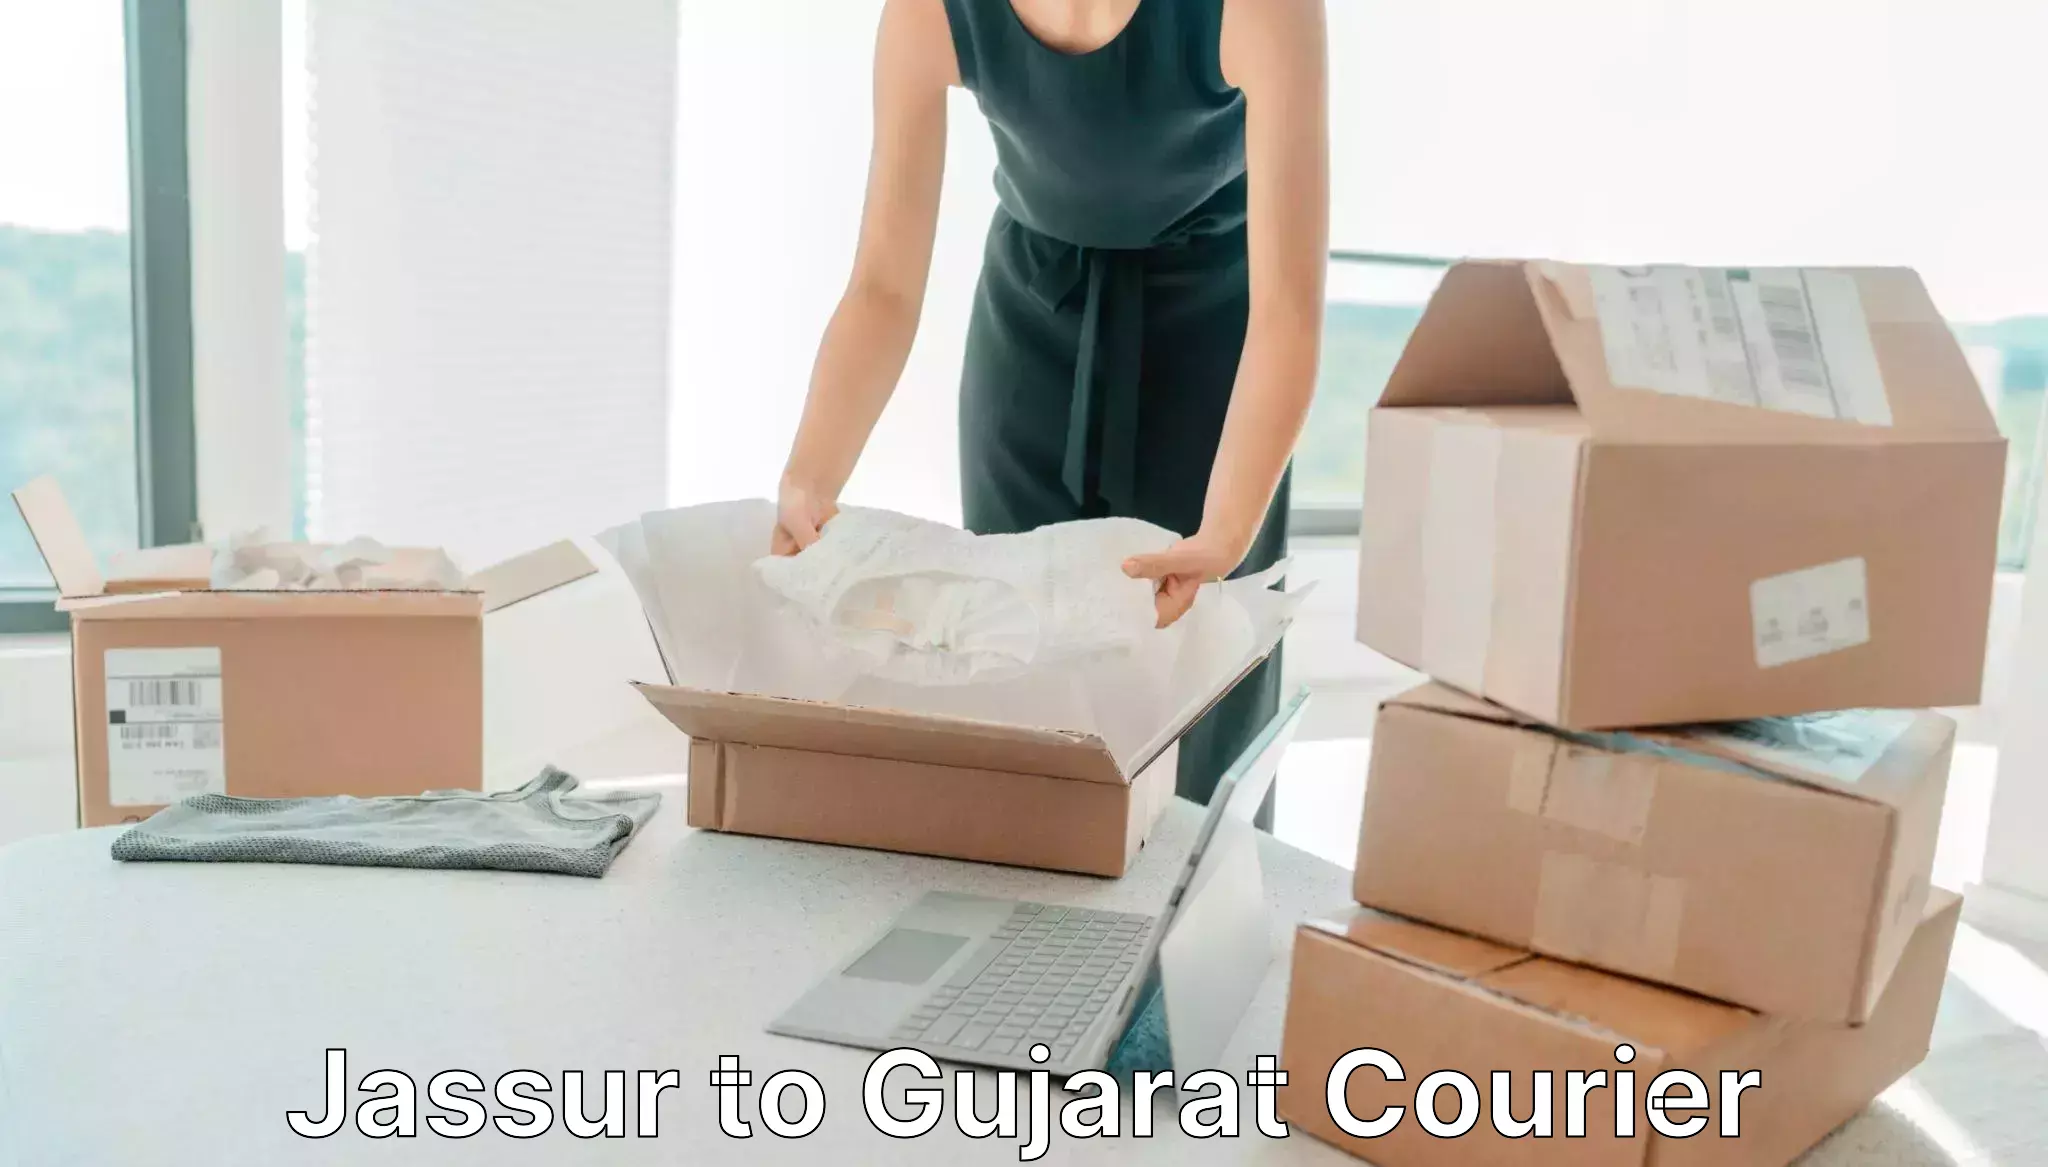 Nationwide courier service Jassur to Ahmedabad